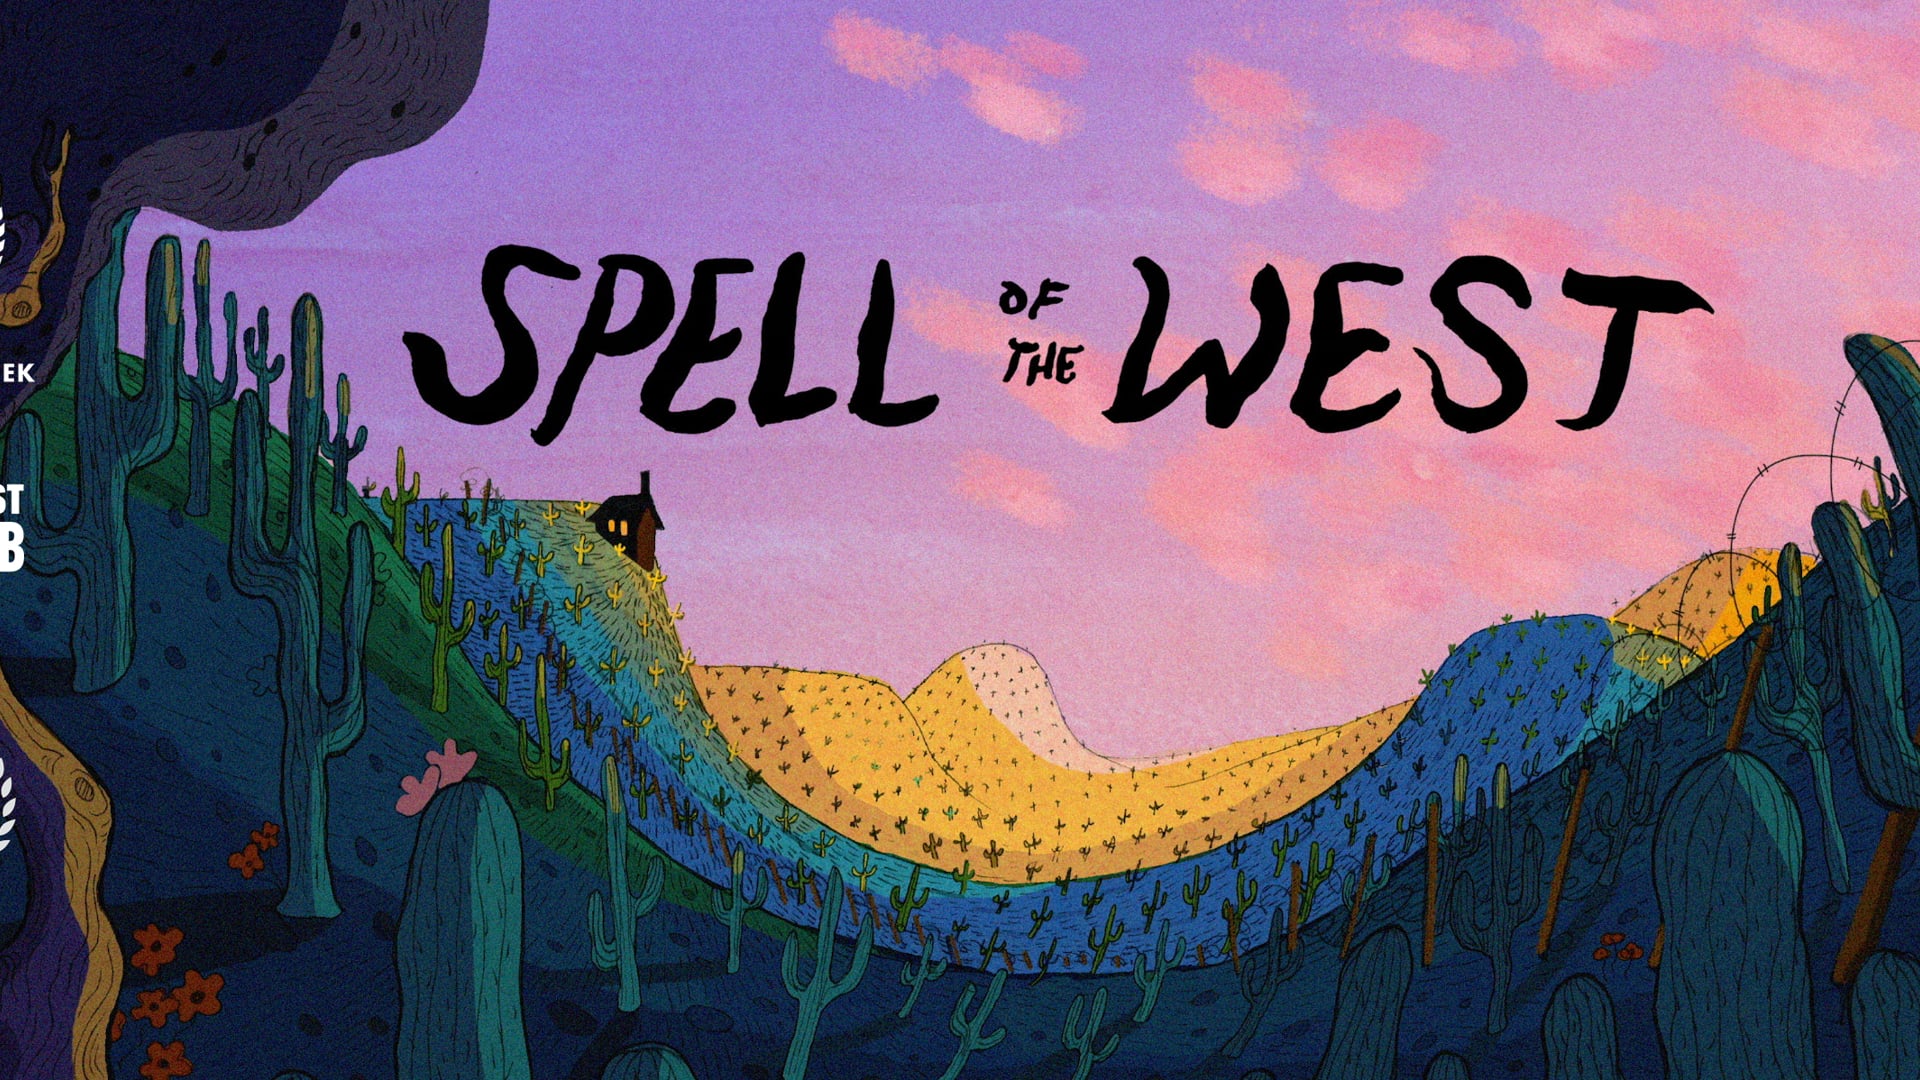 Spell of the West